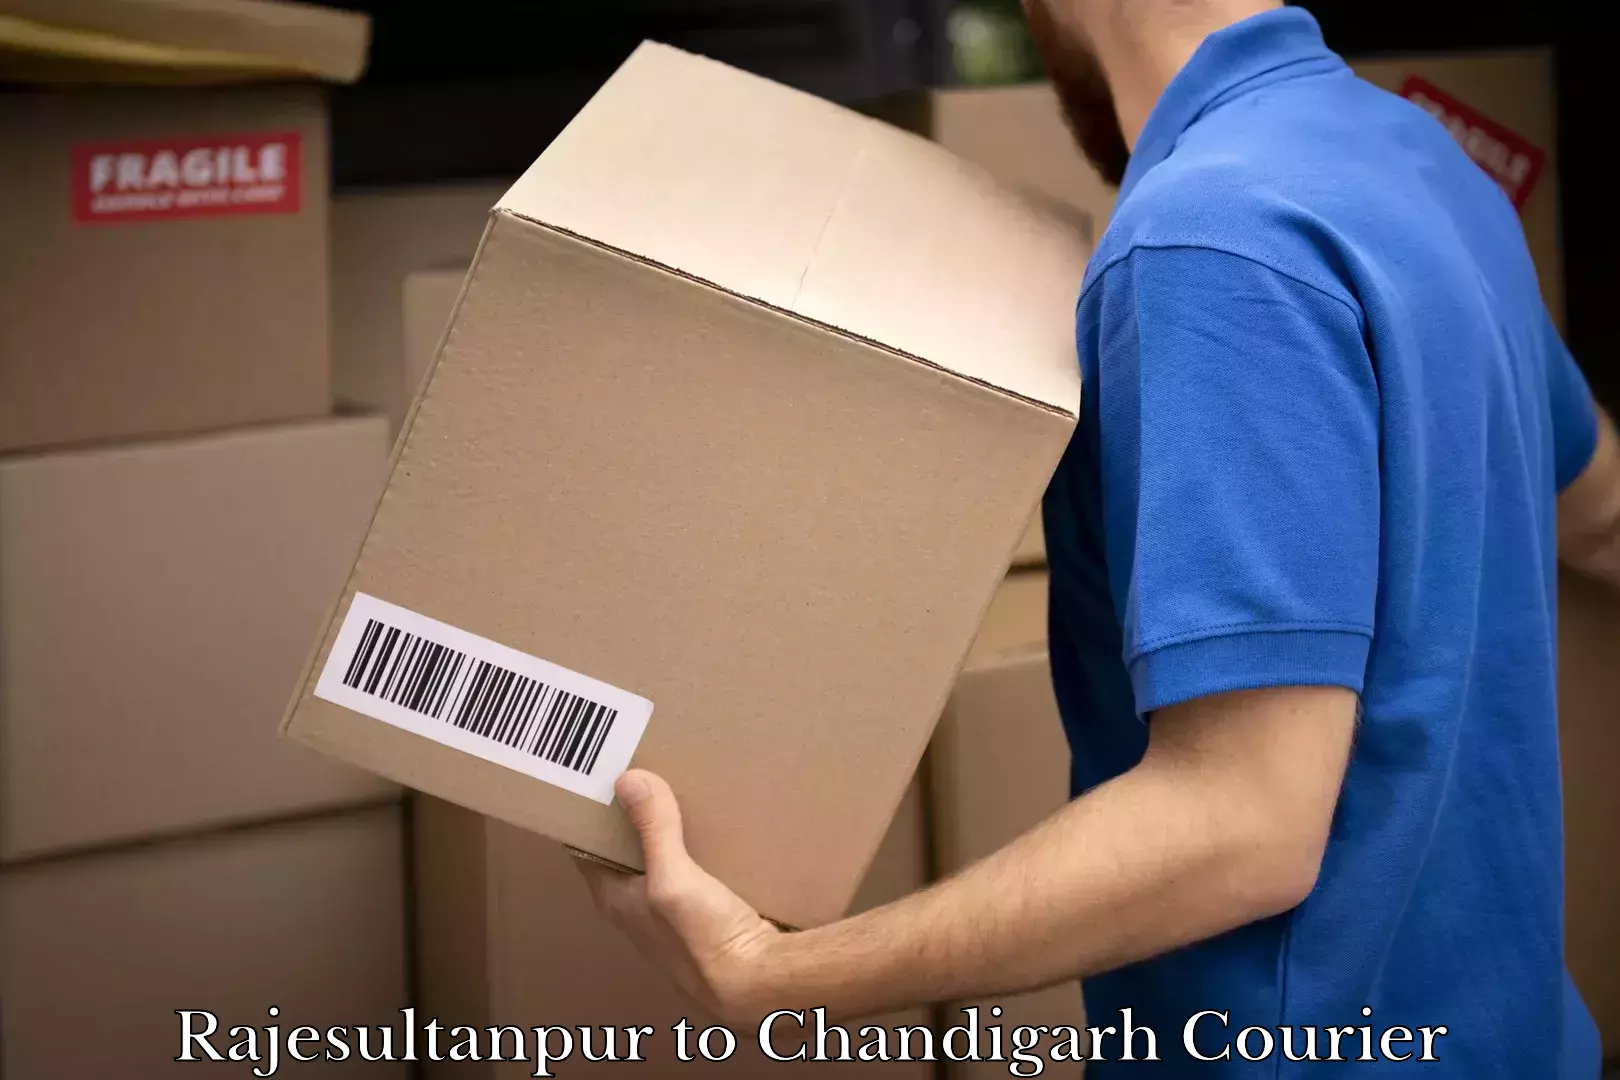 Fast delivery service Rajesultanpur to Chandigarh